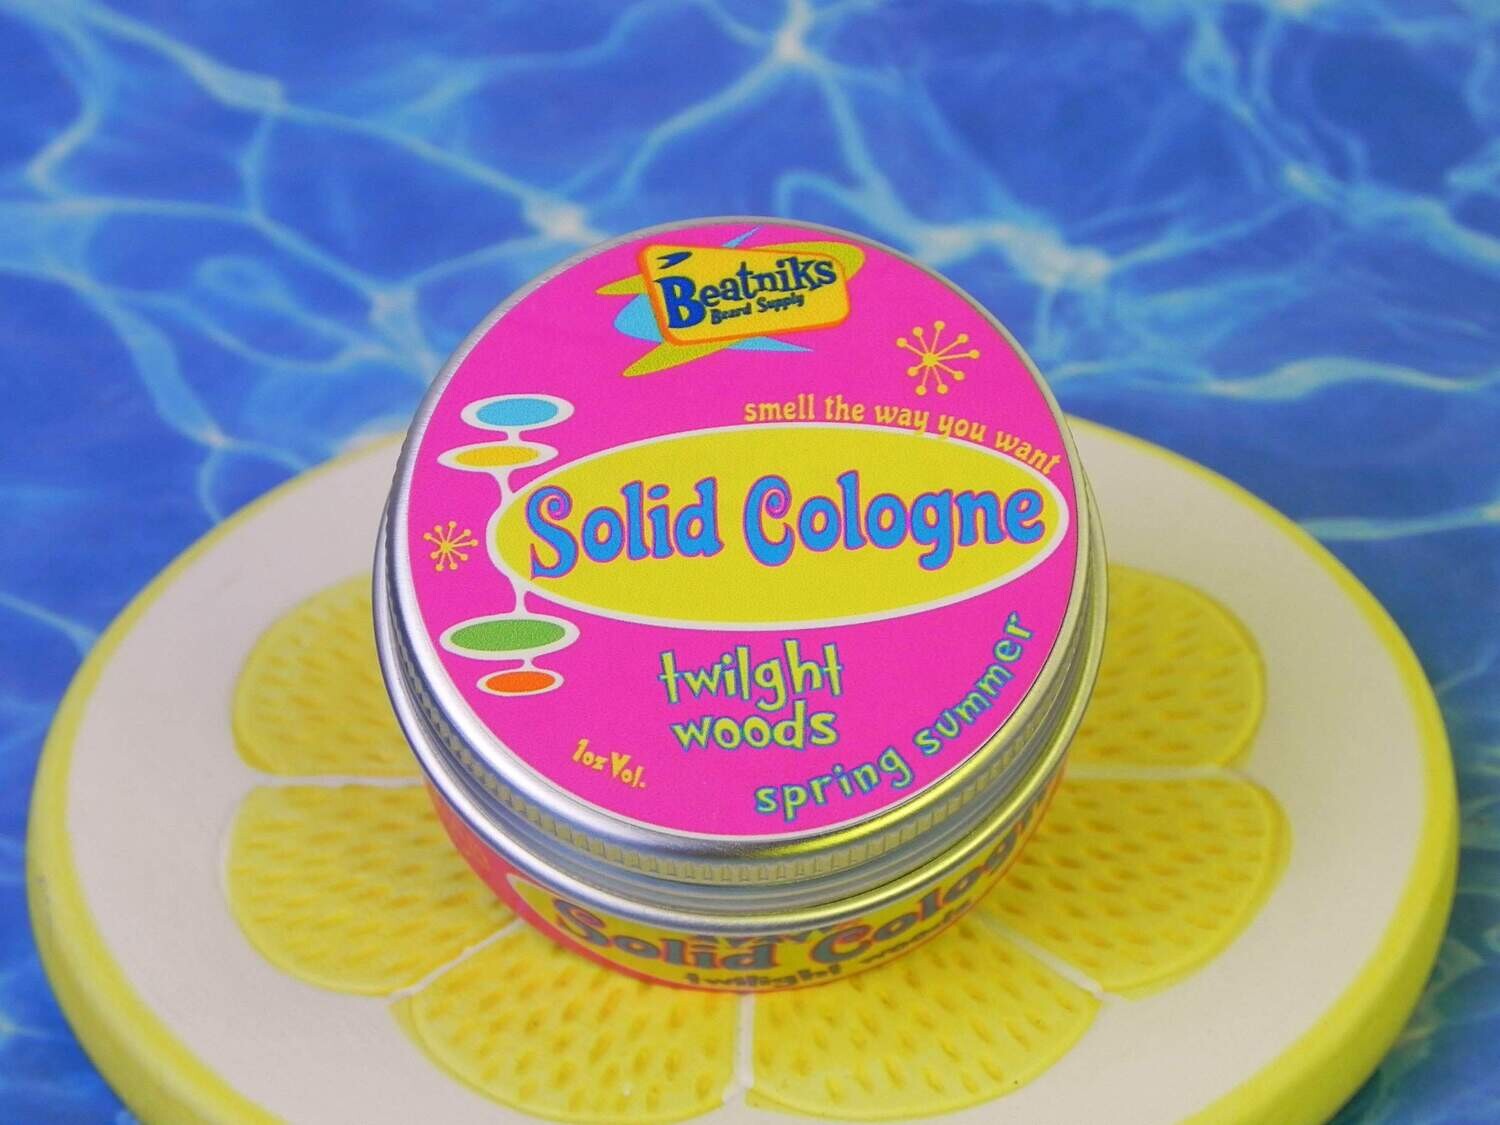 TWILIGHT WOODS* | Solid Cologne